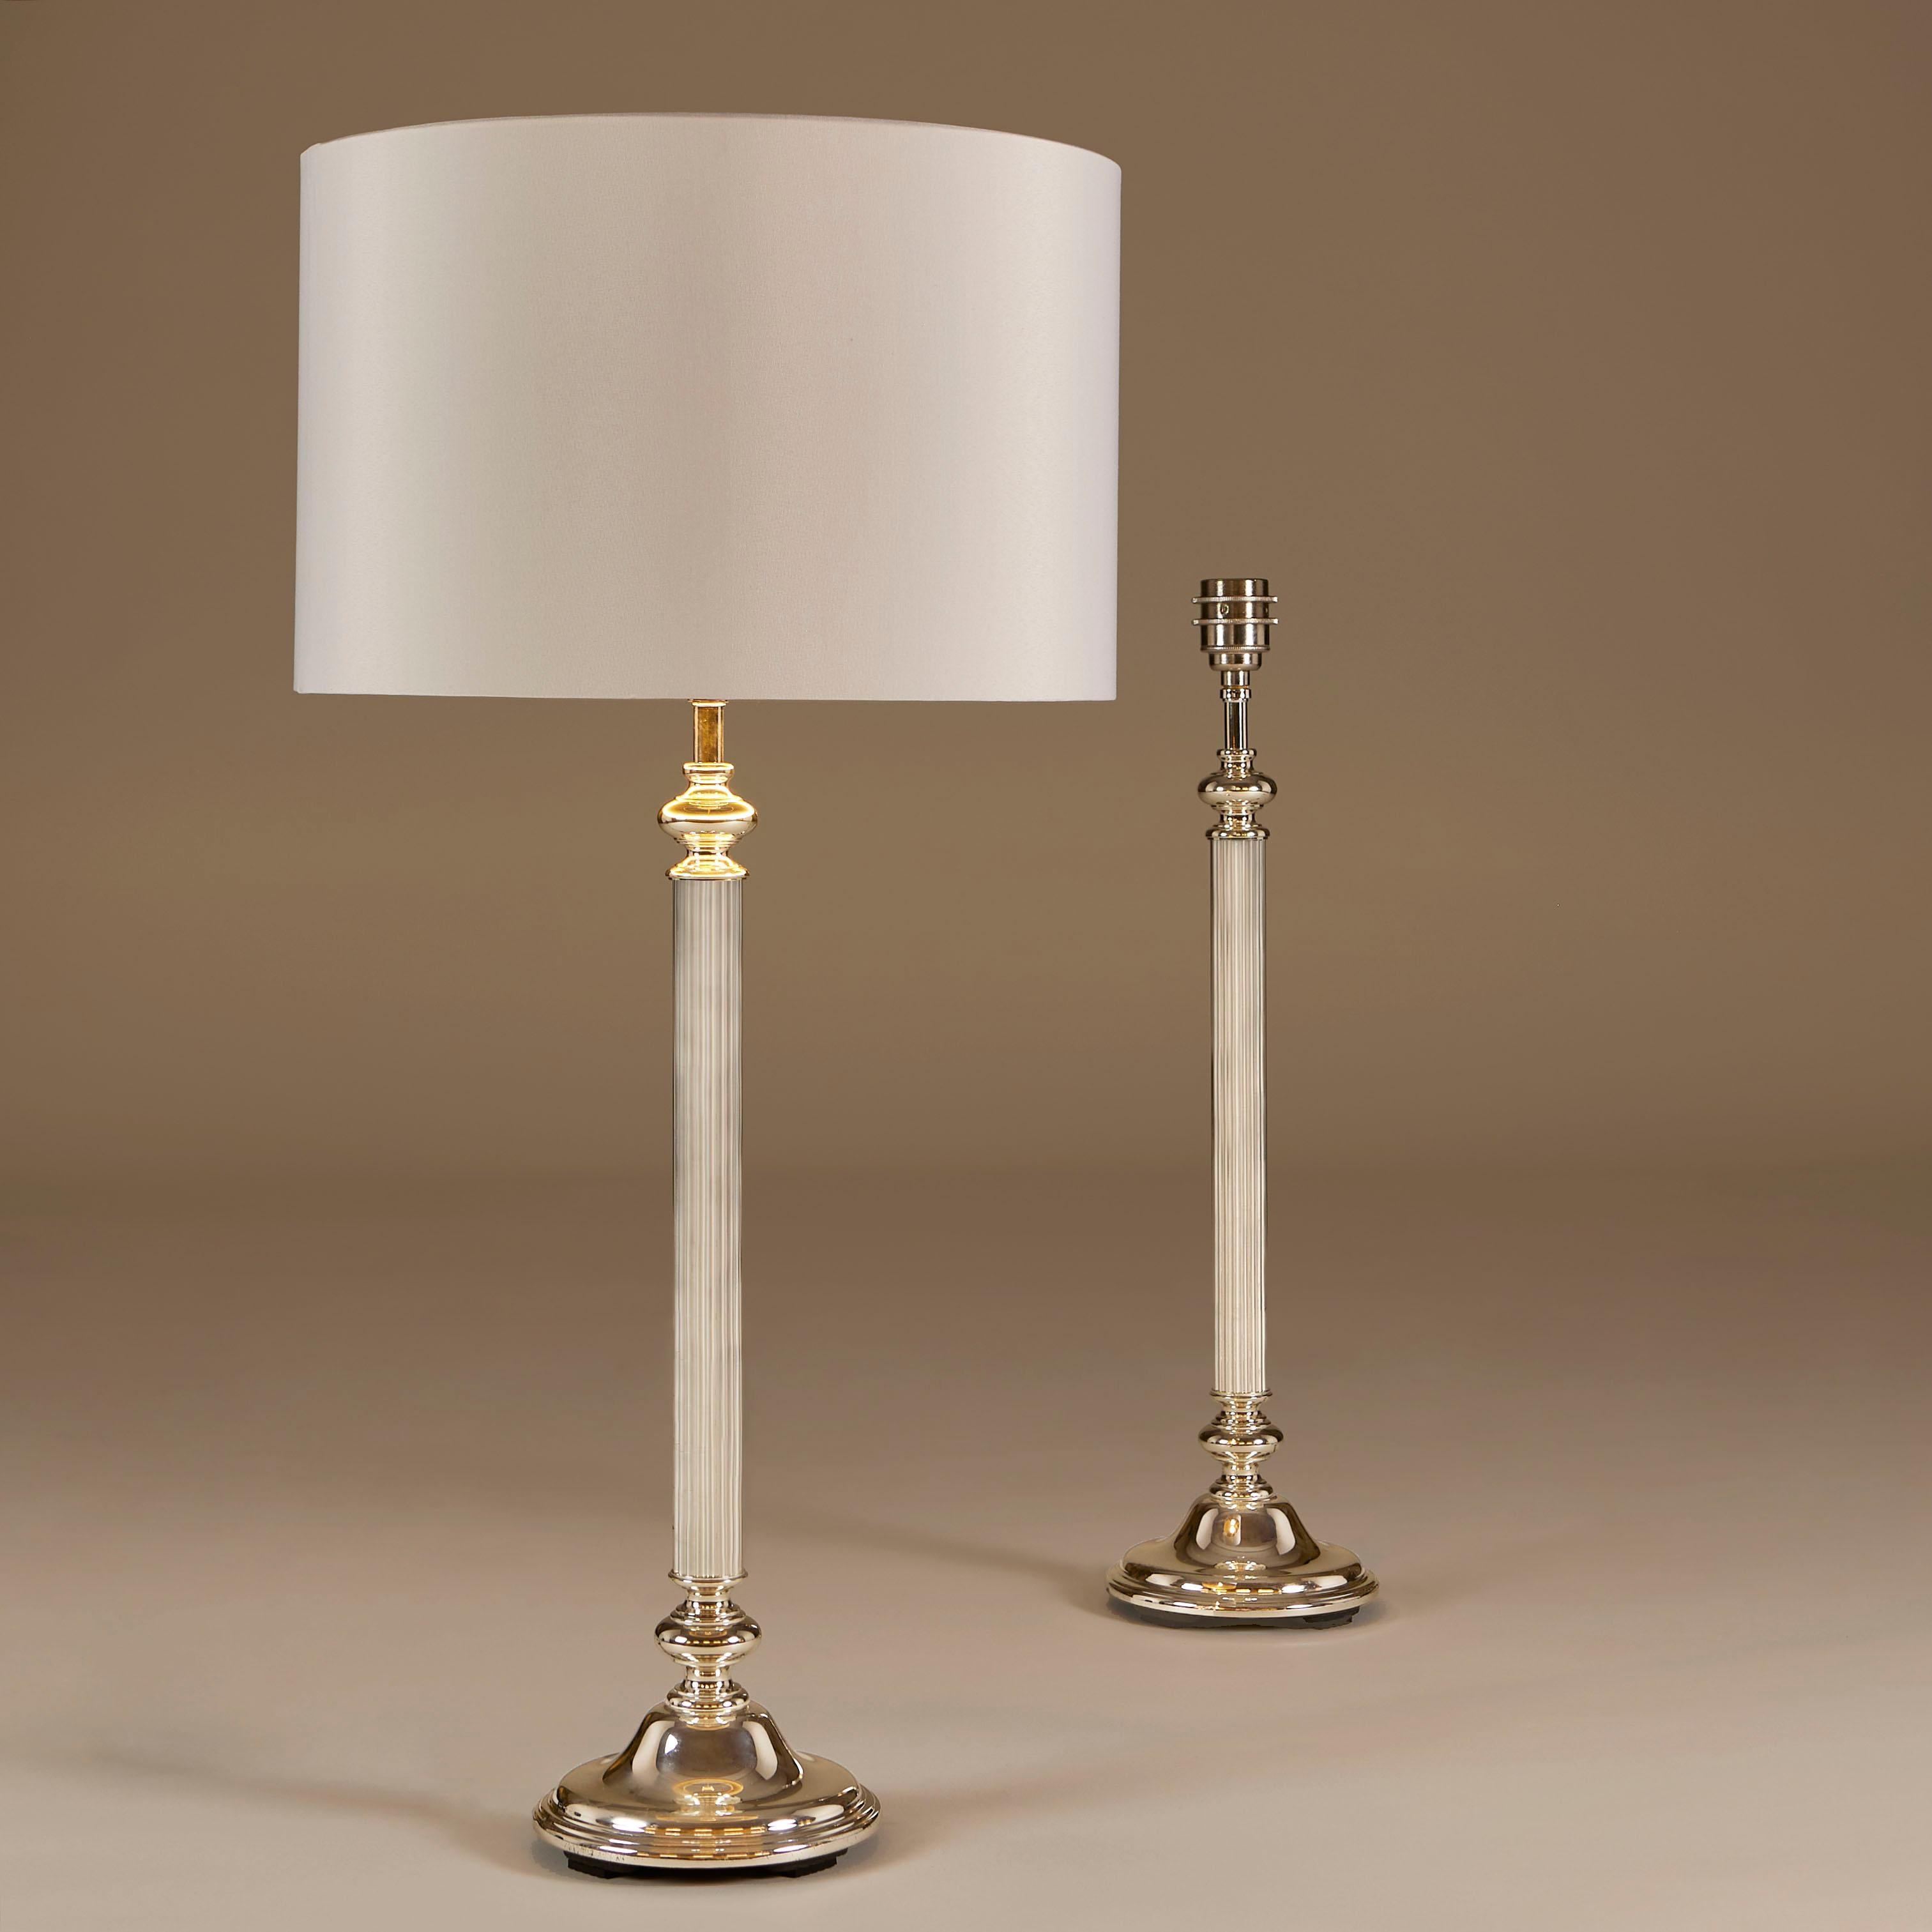 Practical and chic pair of chrome table lamps with decorative curve base and finely ribbed stem.
Lampshades are optional.